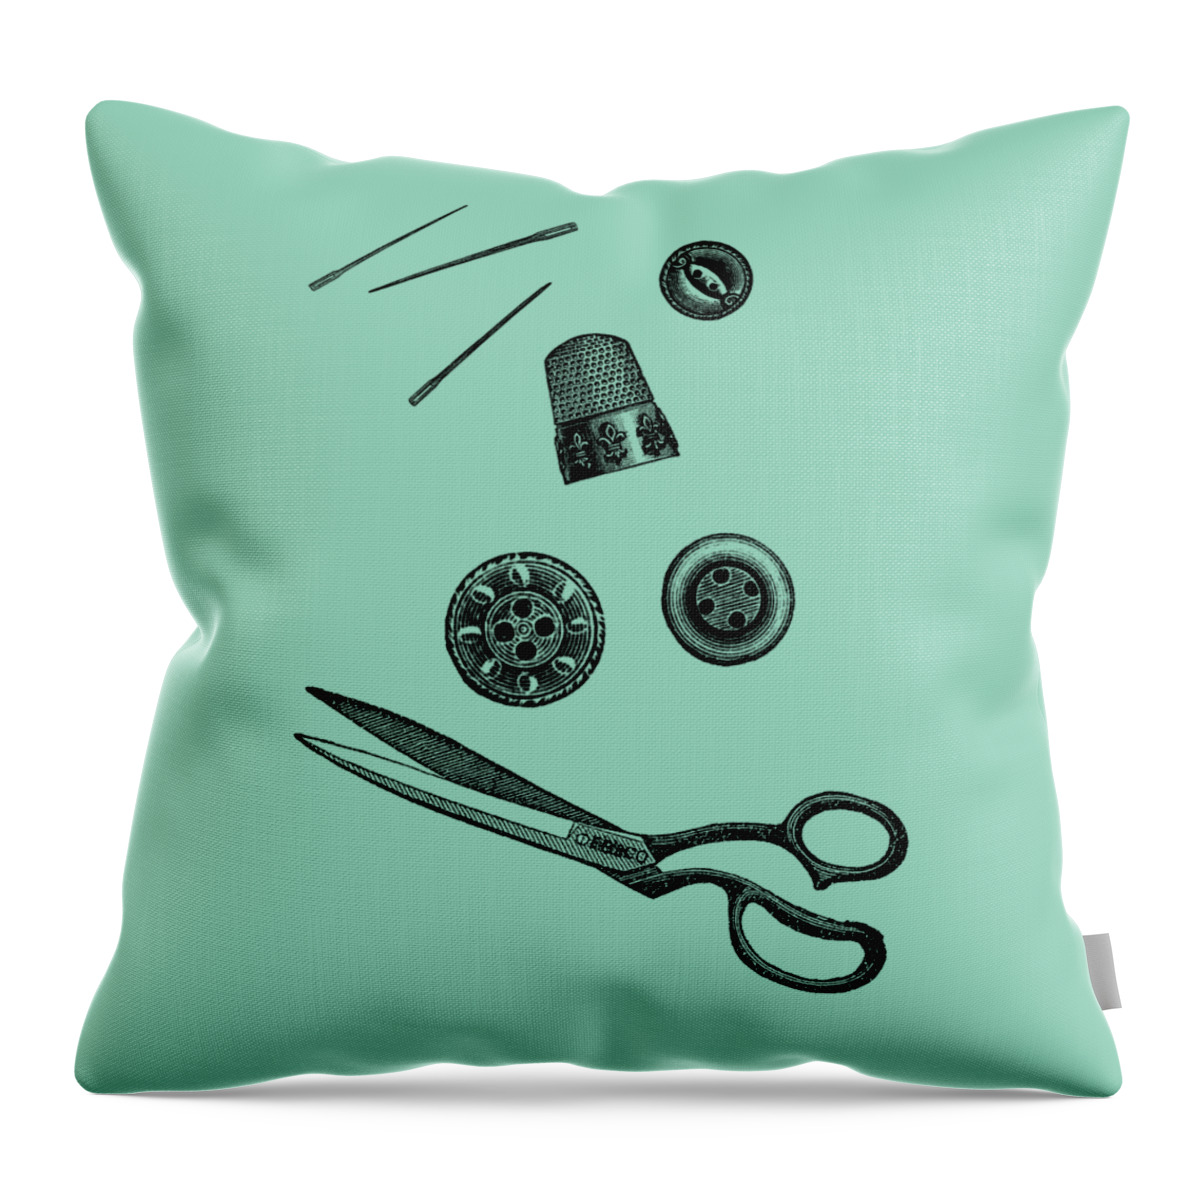 Sewing Throw Pillow featuring the digital art Sewing Supplies In Black And White by Madame Memento